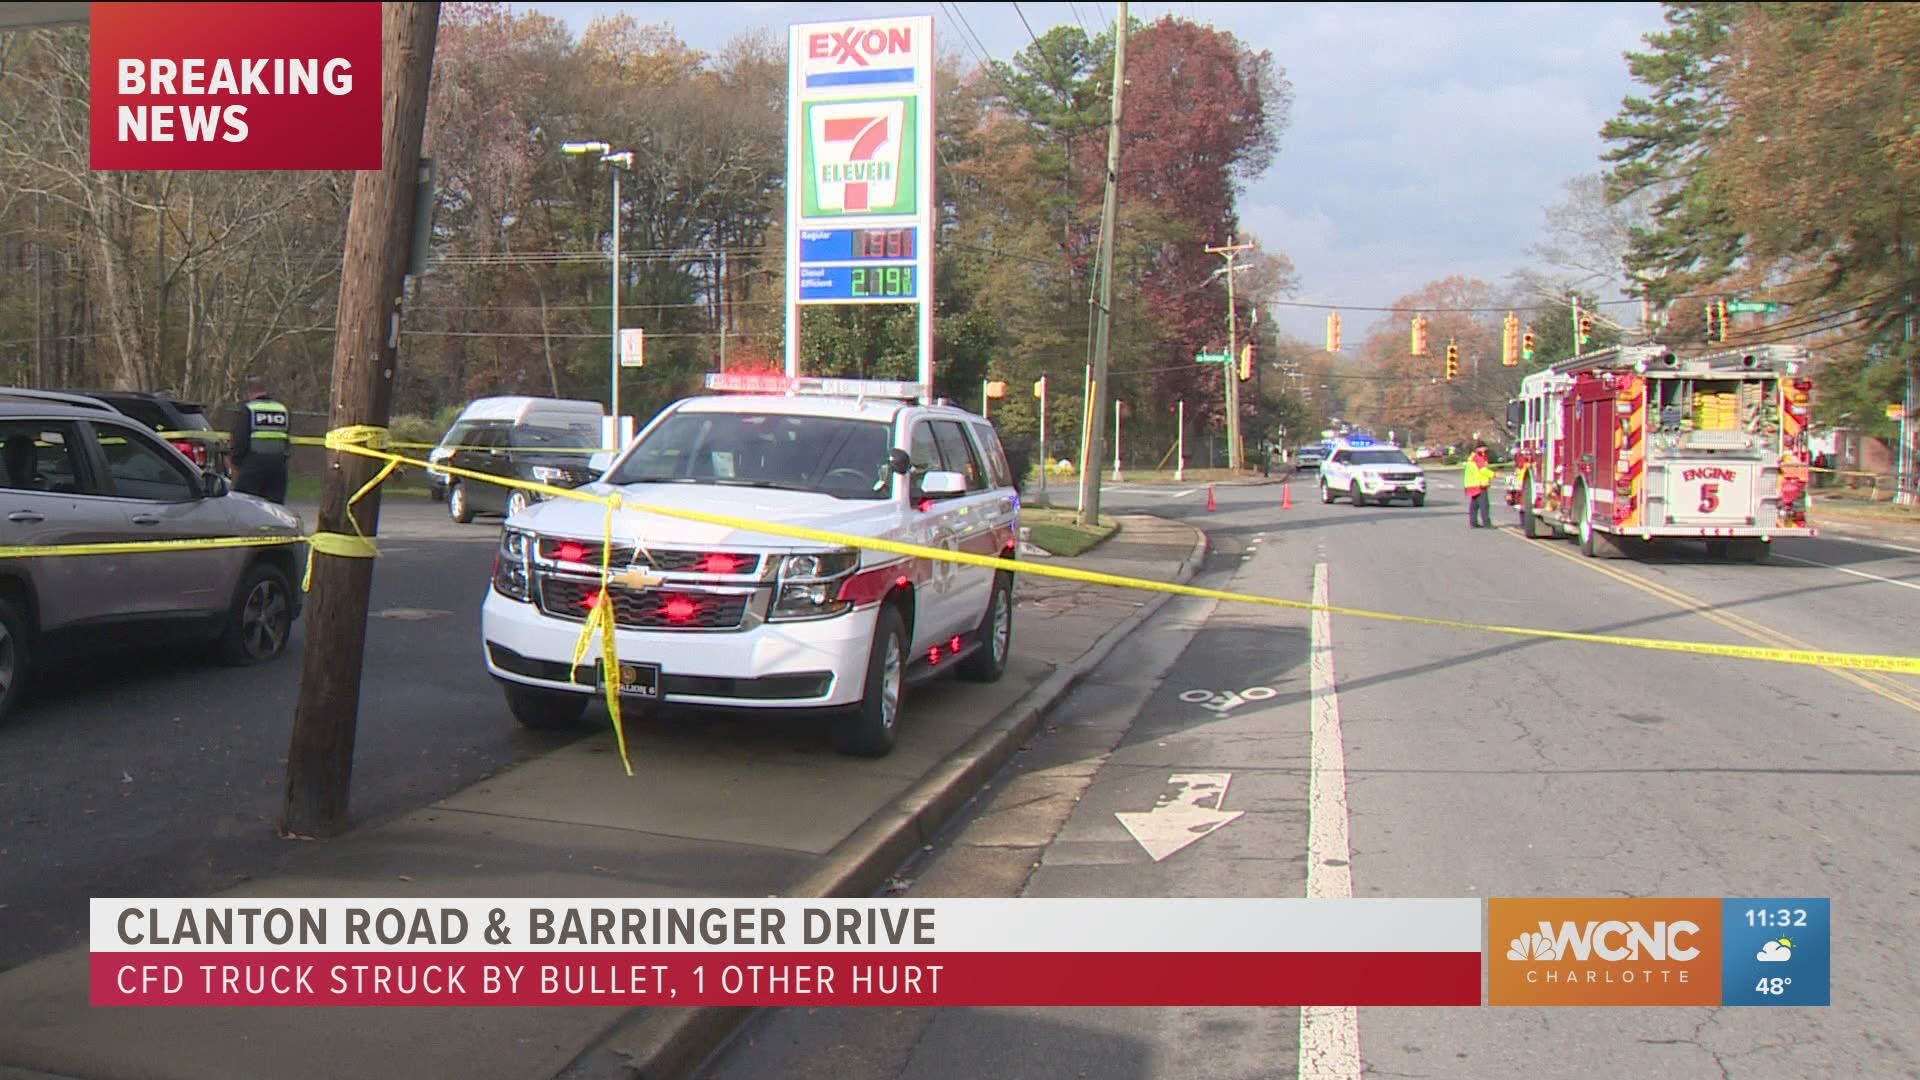 The vehicles were sprayed by bullets on  Clanton Road near Barringer drive Monday morning. One person had minor injuries.